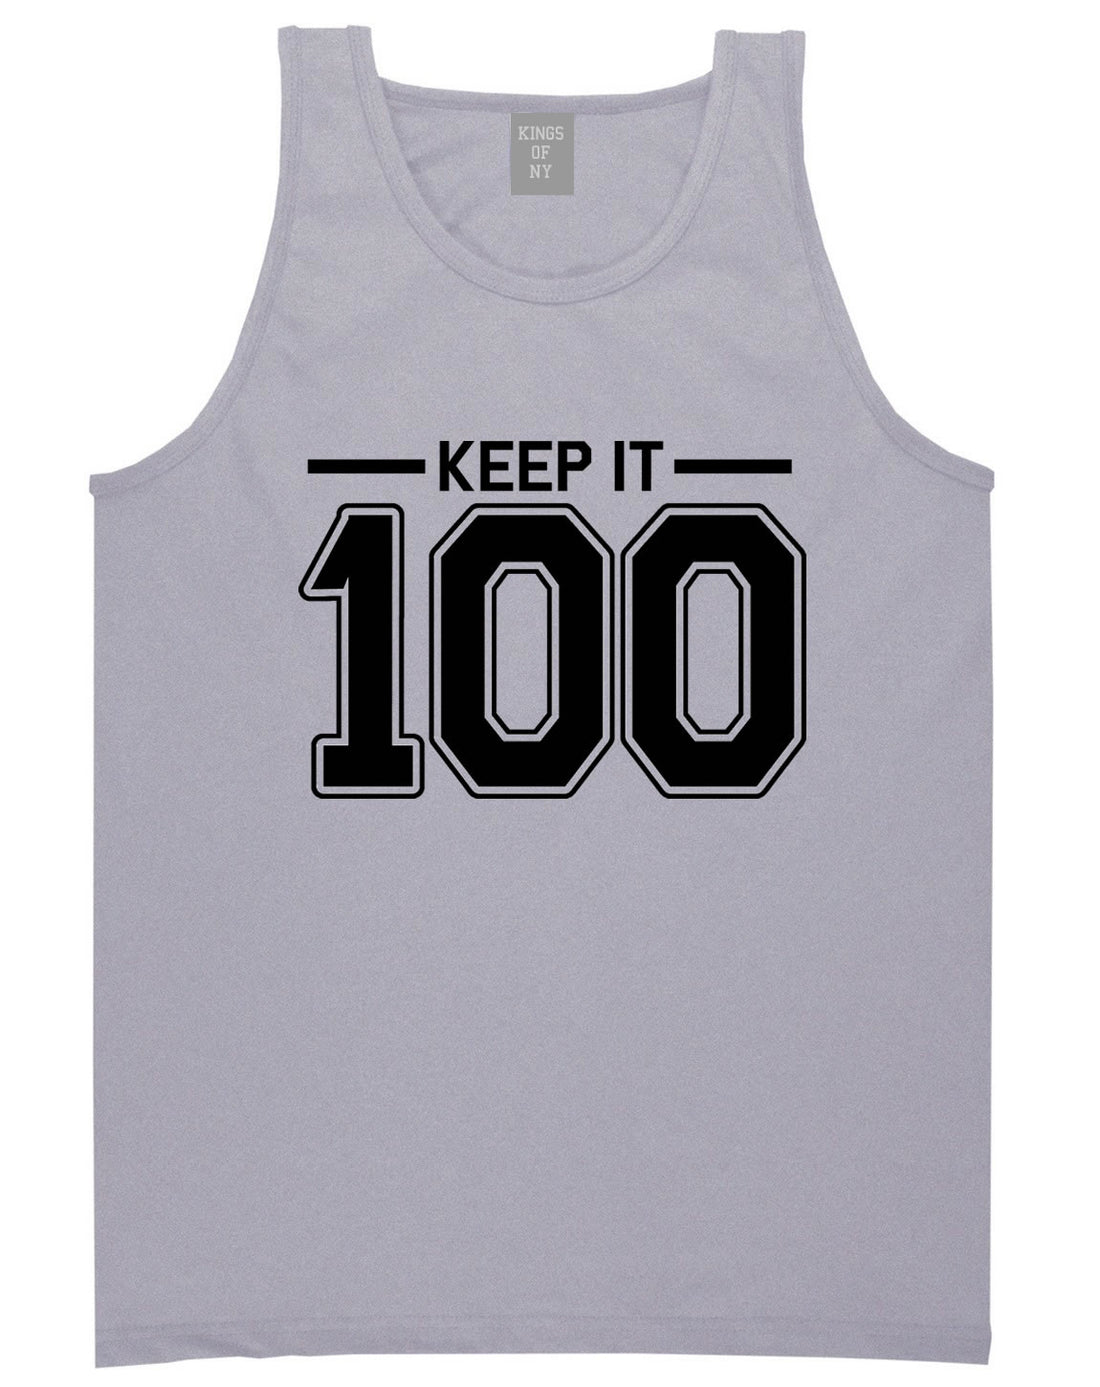 Keep It 100 Tank Top in Grey by Kings Of NY